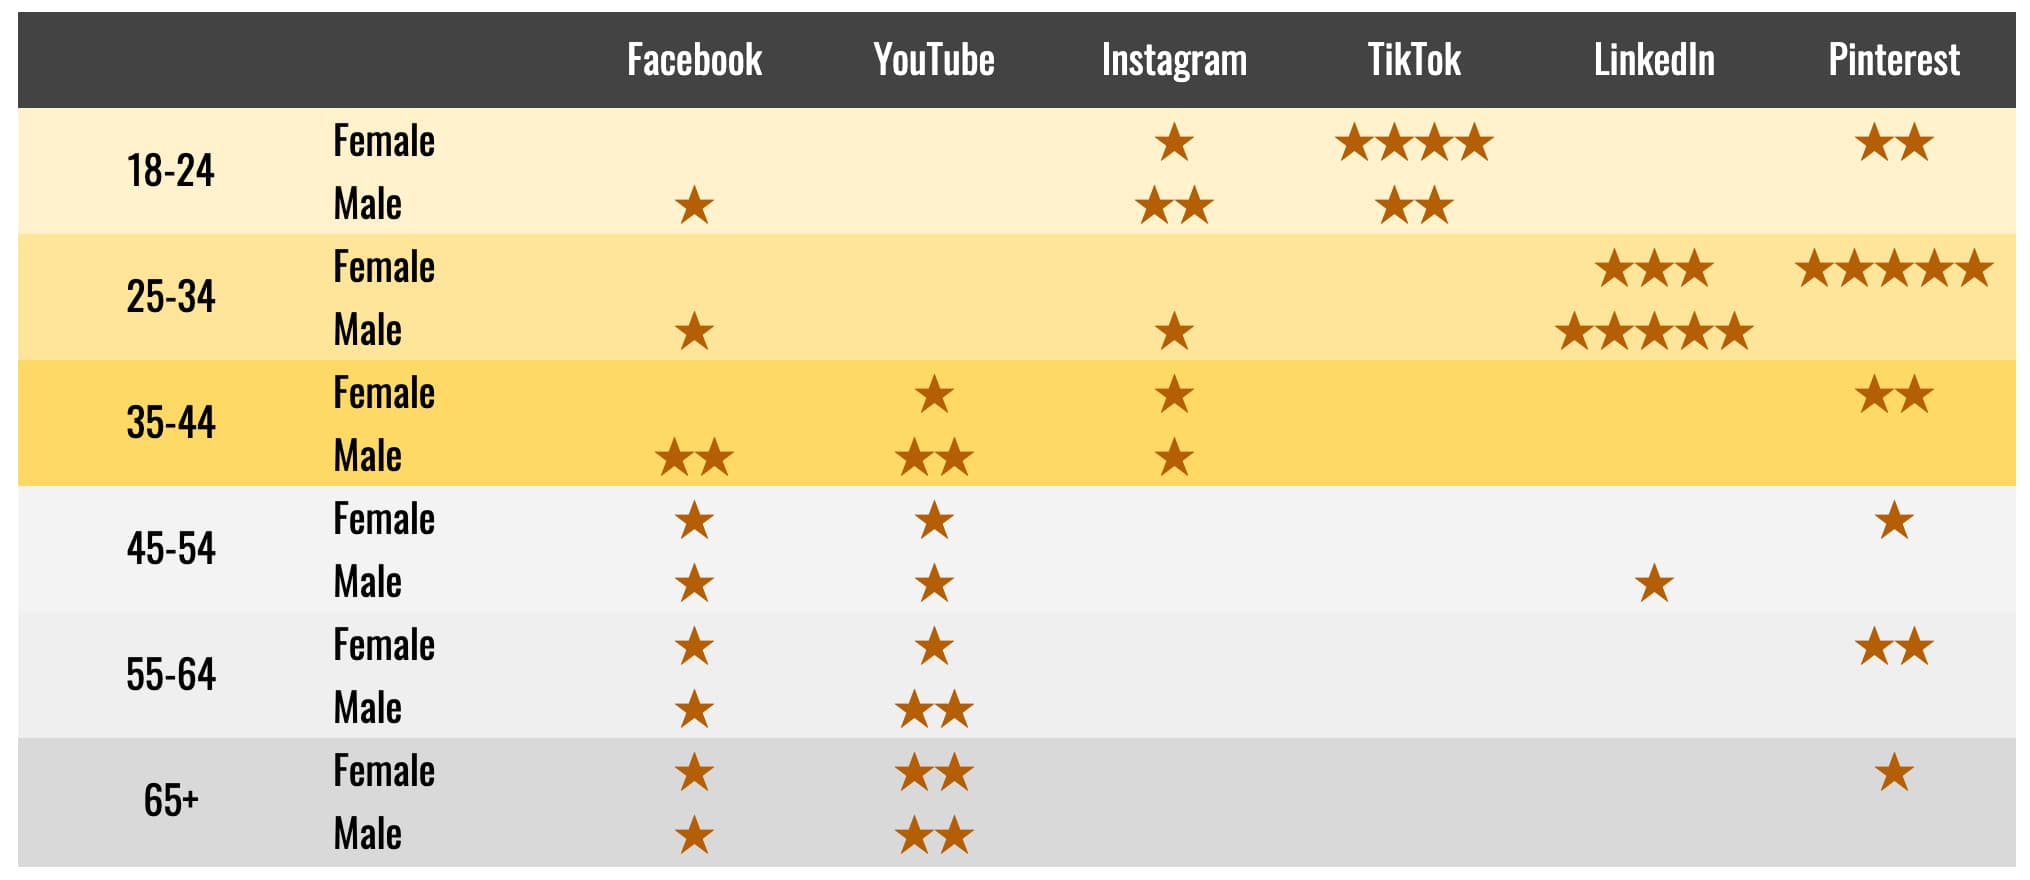 A chart showing the number of followers for each social media platform.